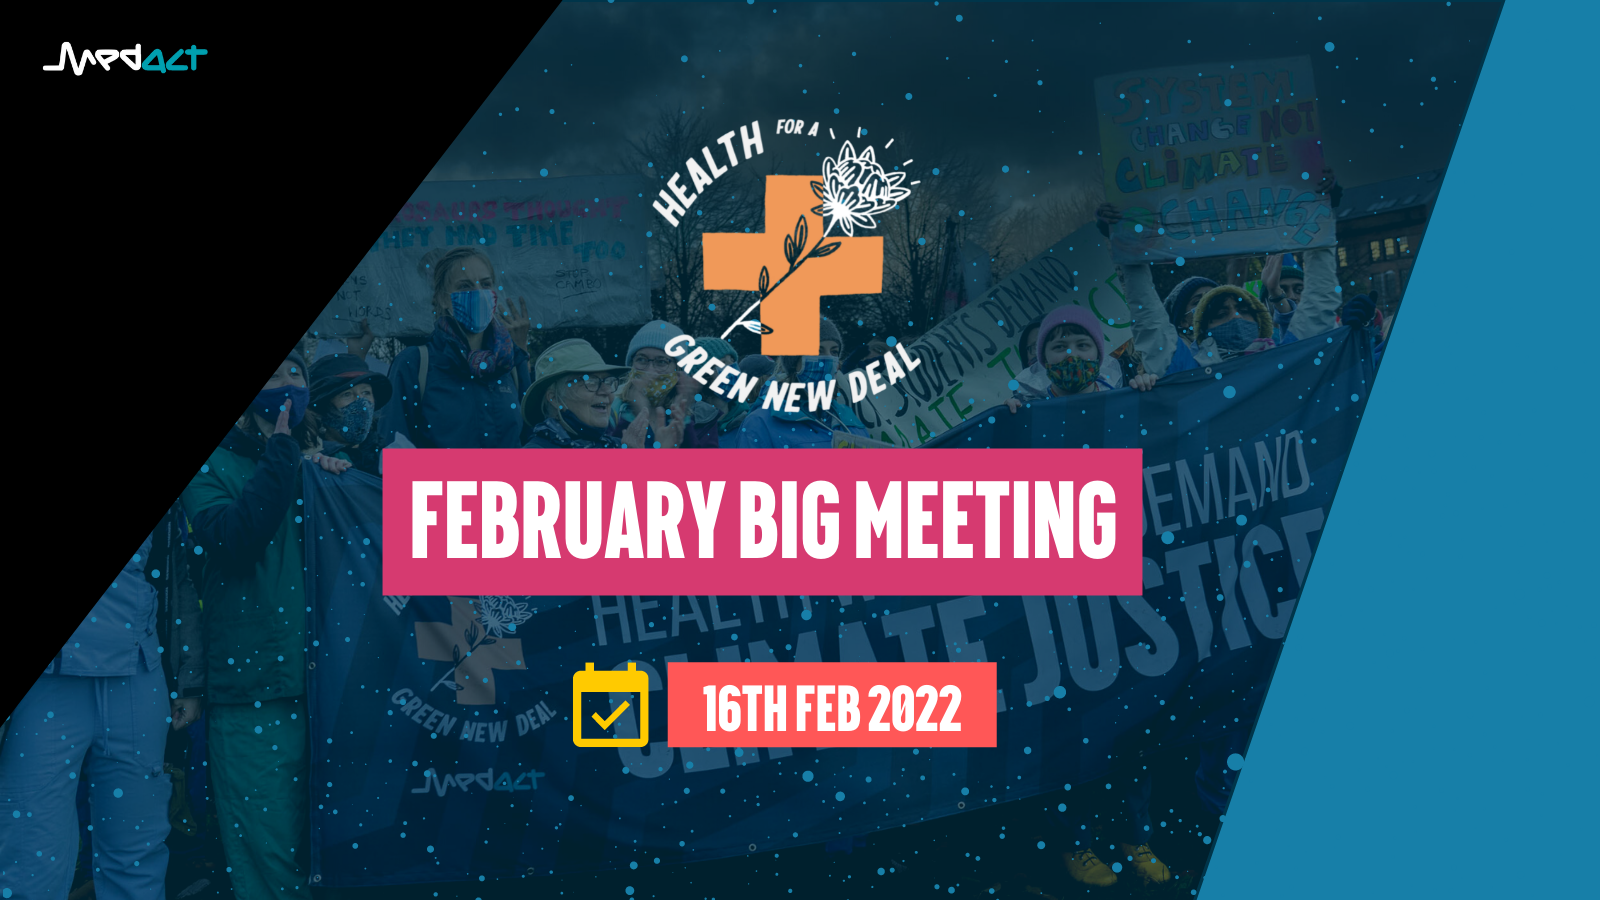 Health for a Green New Deal February Big Meeting